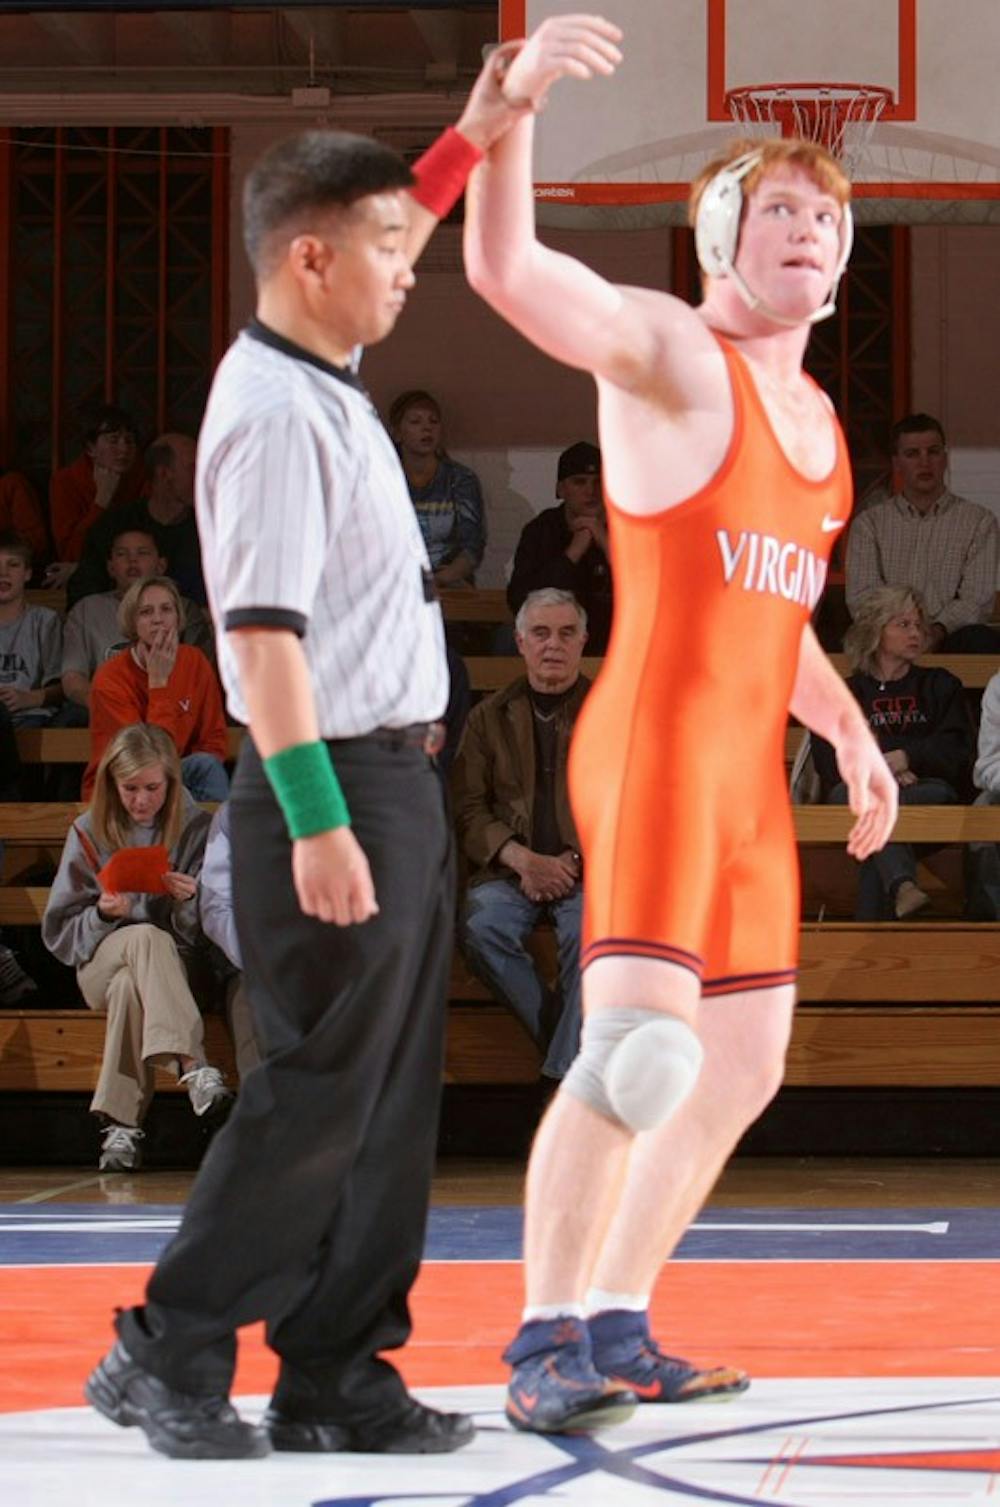 Brent Jones won the 197lb division by forfeit in the meet against UNC.  UVA outscored the Tar Heels 27-10.